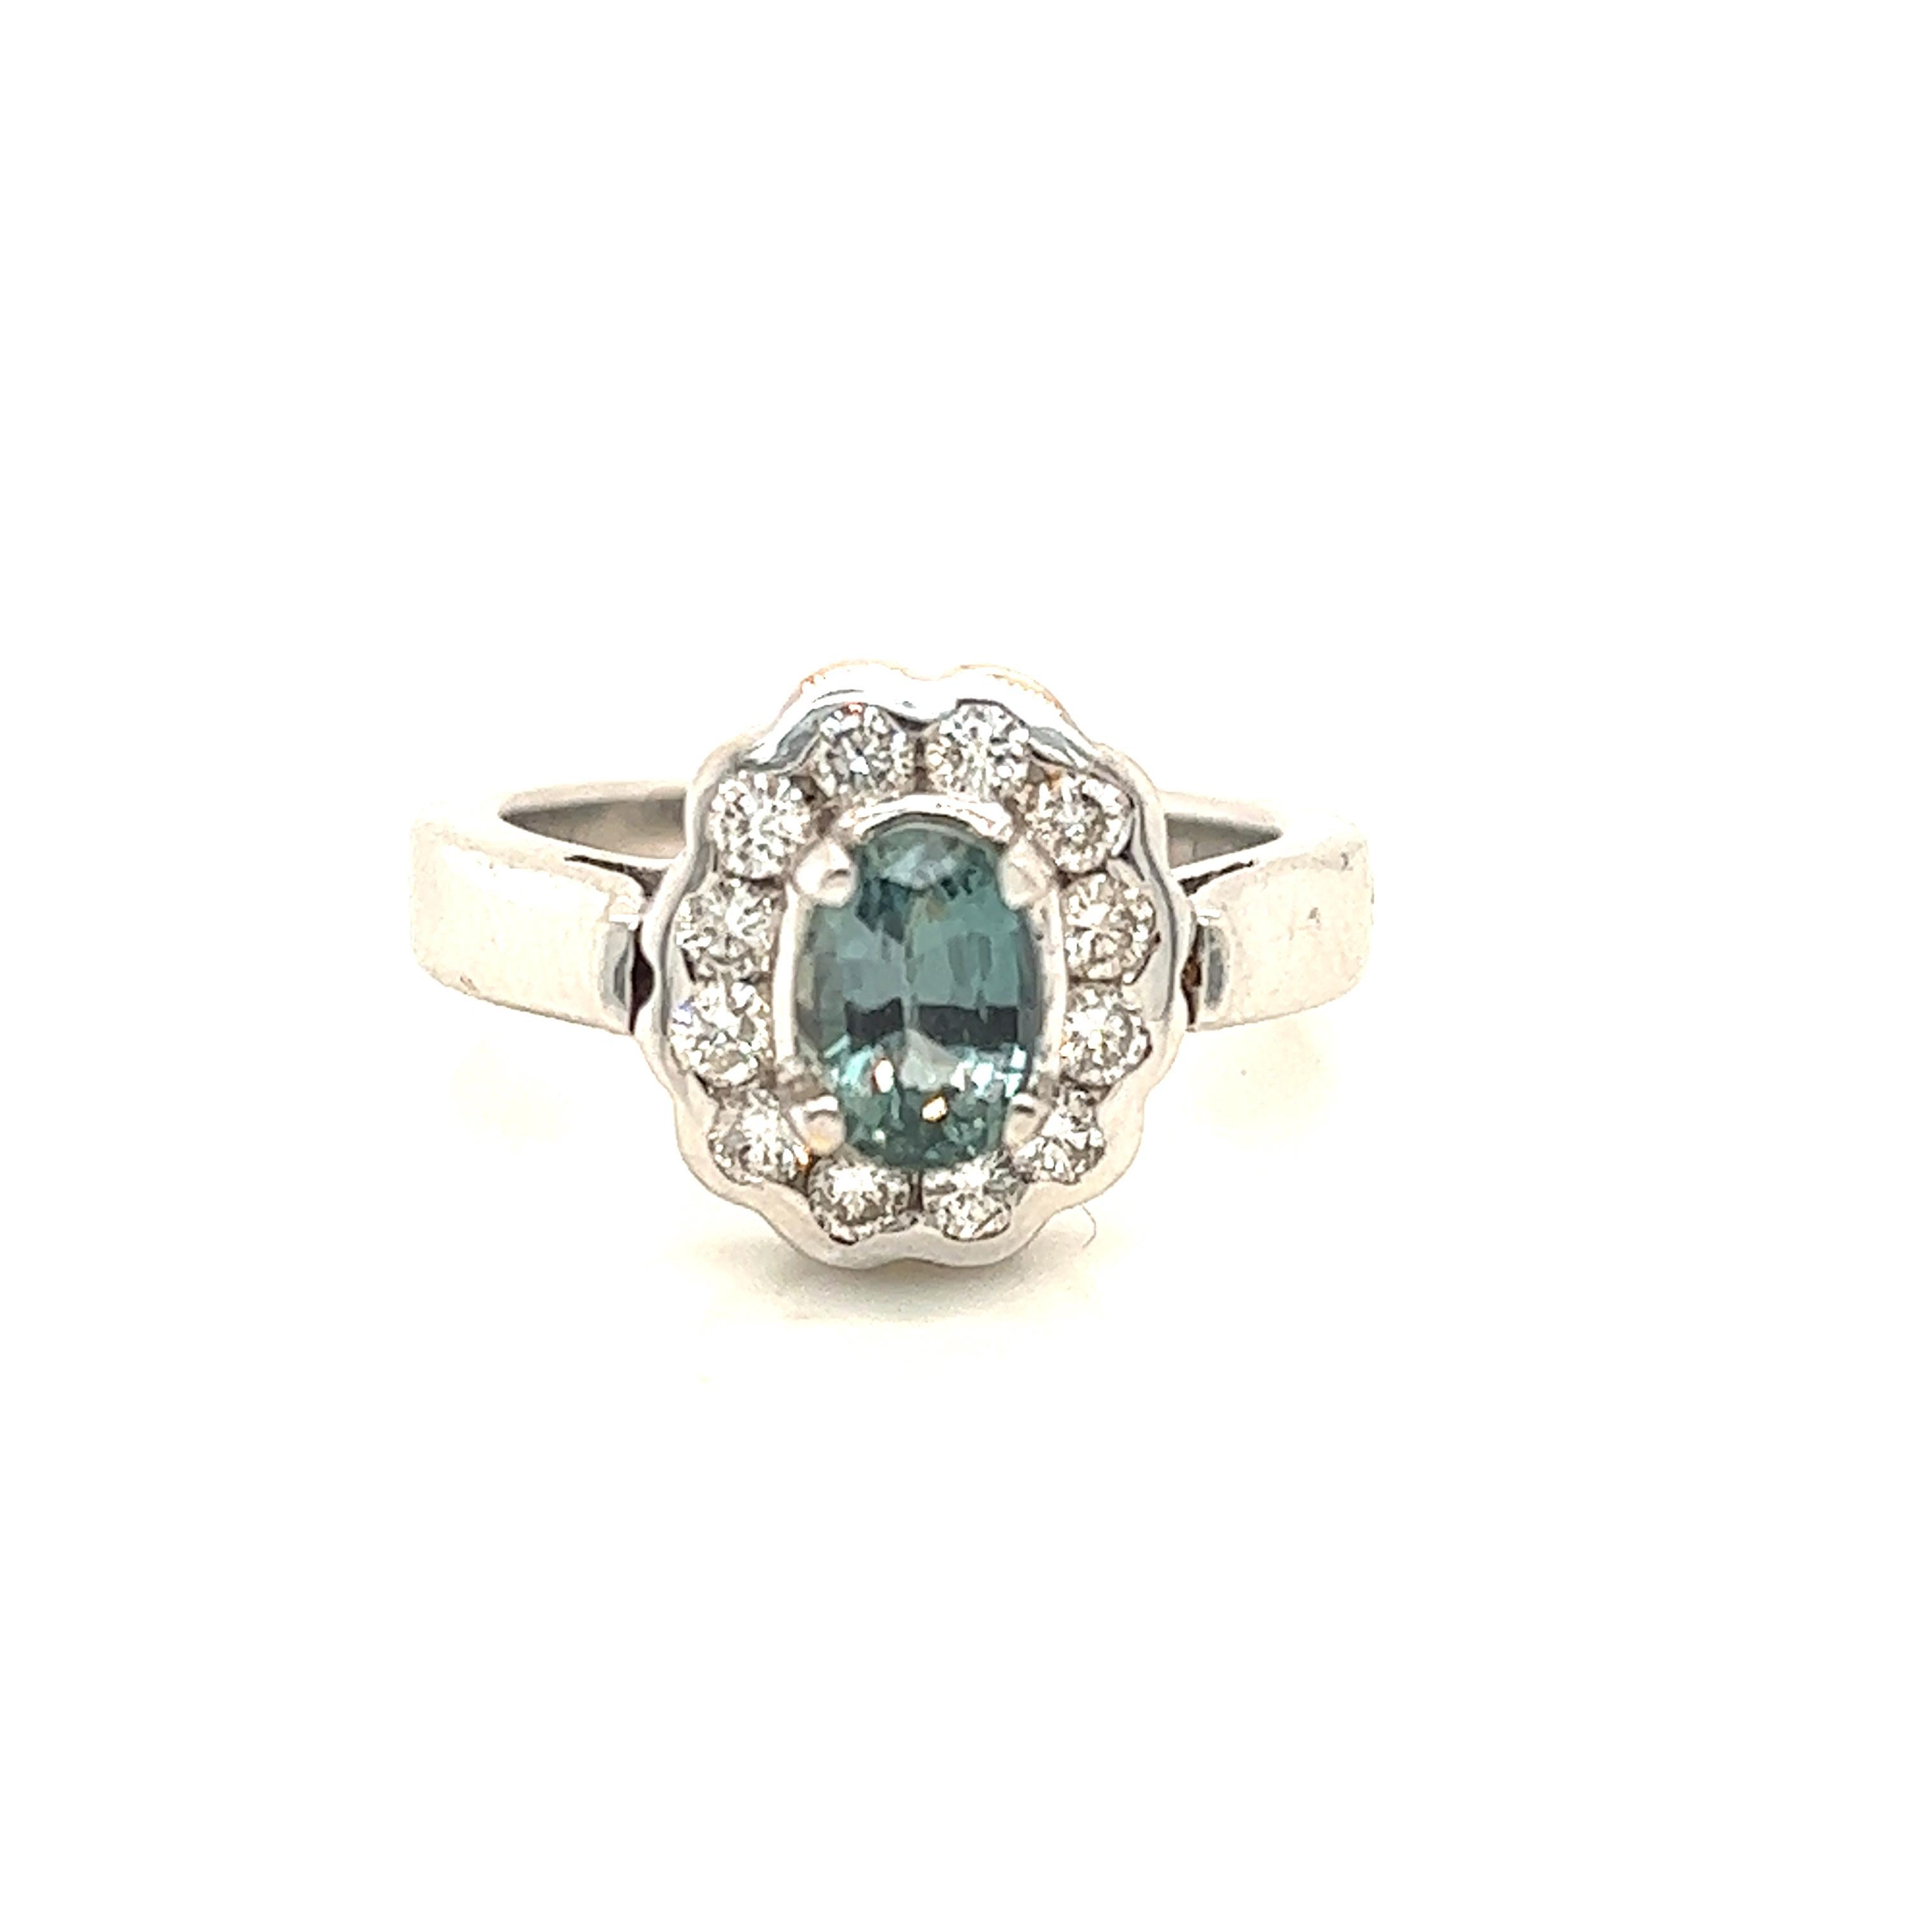 This is a gorgeous natural AAA quality oval Alexandrite surrounded by dainty diamonds that is set in a vintage white gold setting. This ring features a natural 1.27 carat oval alexandrite that is certified by the Gemological Institute of America